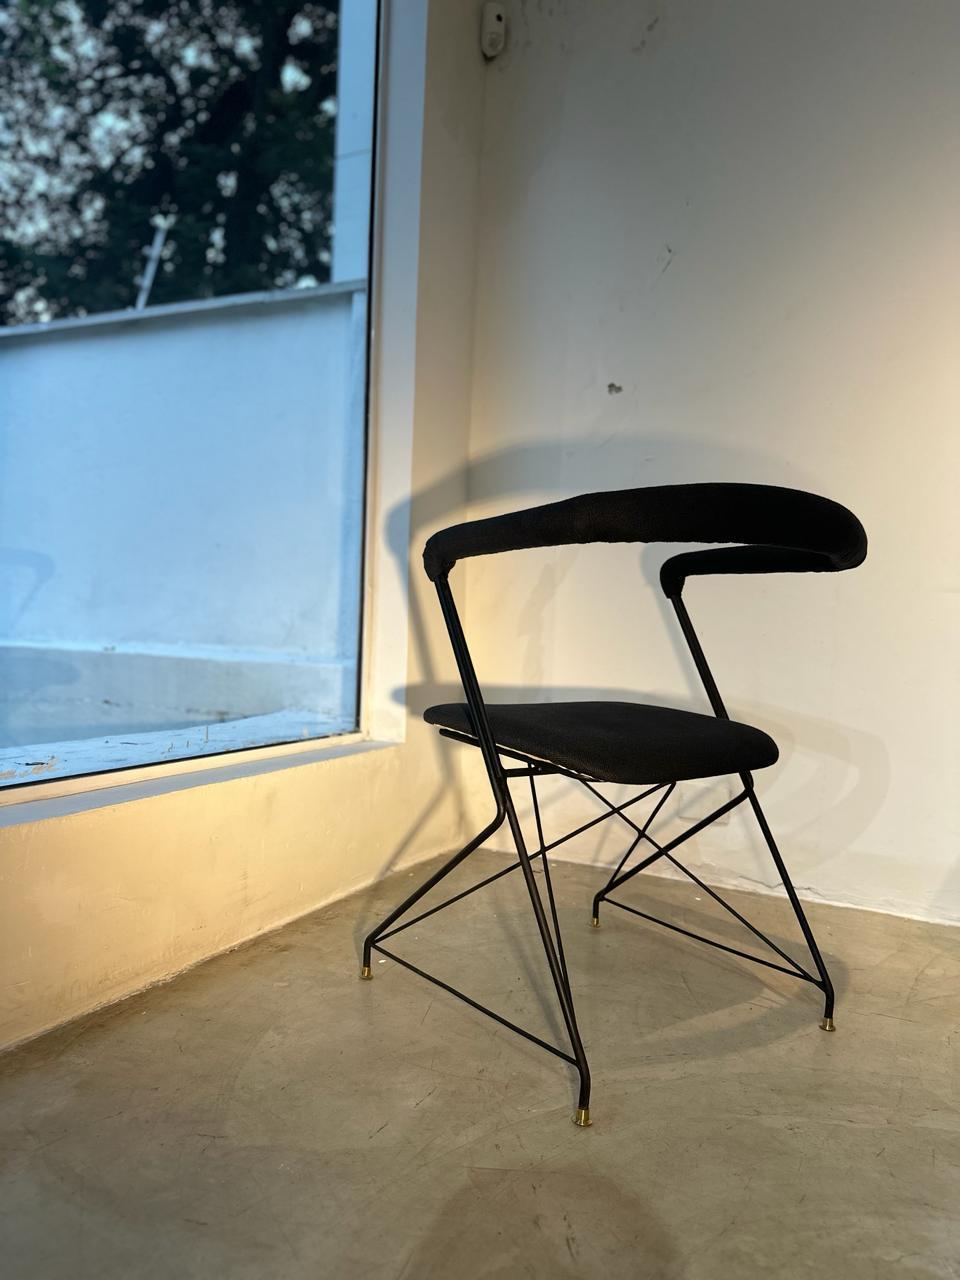 Extremely rare armchair with an iron structure and molded upholstery, extremely comfortable. This chair is a good example of how avant-garde furniture design could be in the mid- 1950’s.  It was acquired directly from the Hauner Family.

This